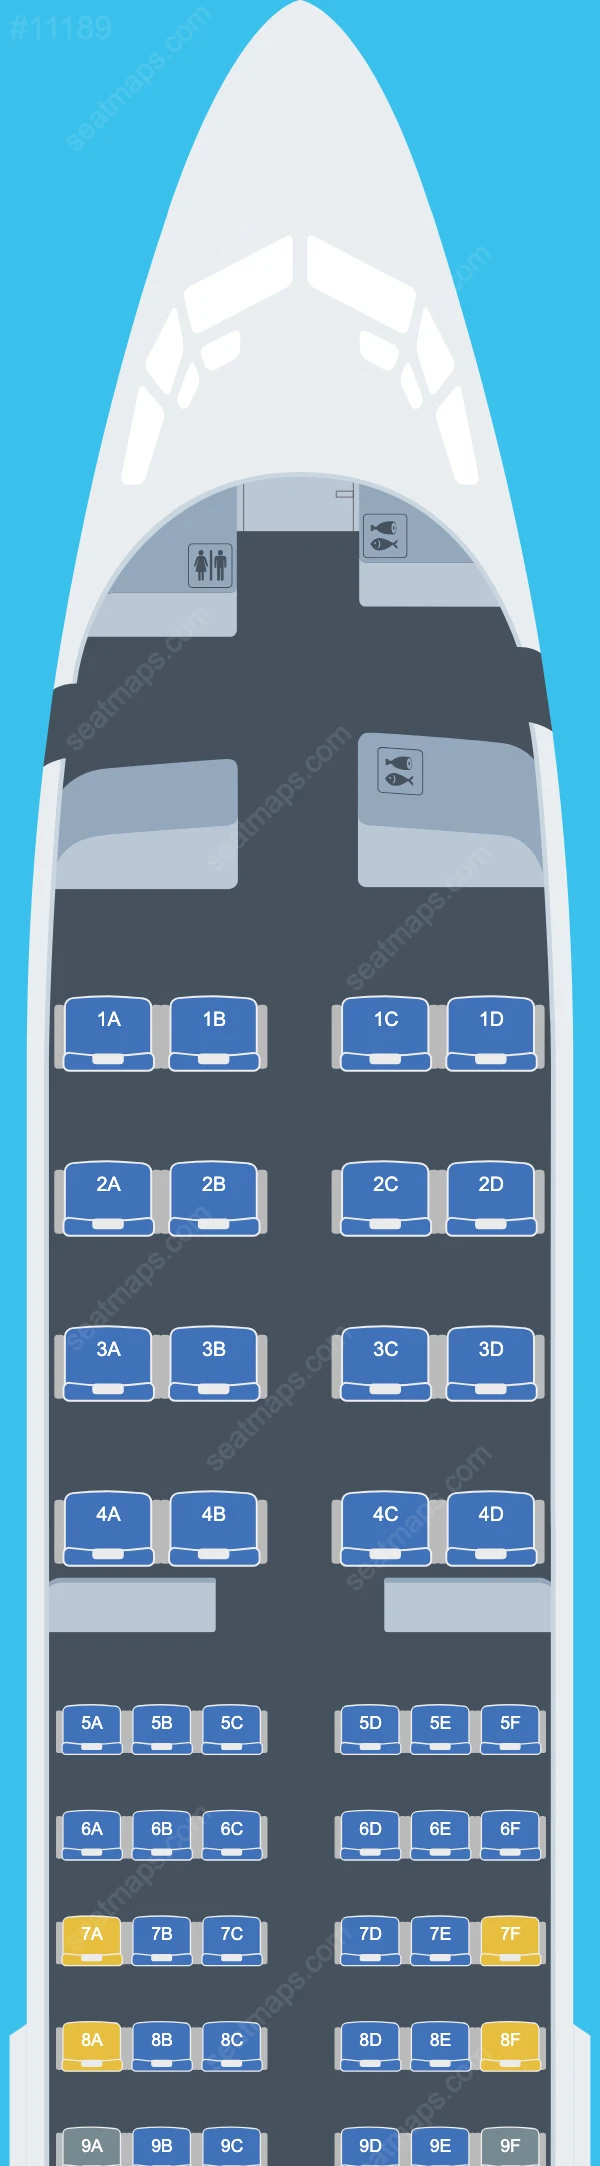 Daallo Airlines Boeing 737 aircraft seat map  737-400